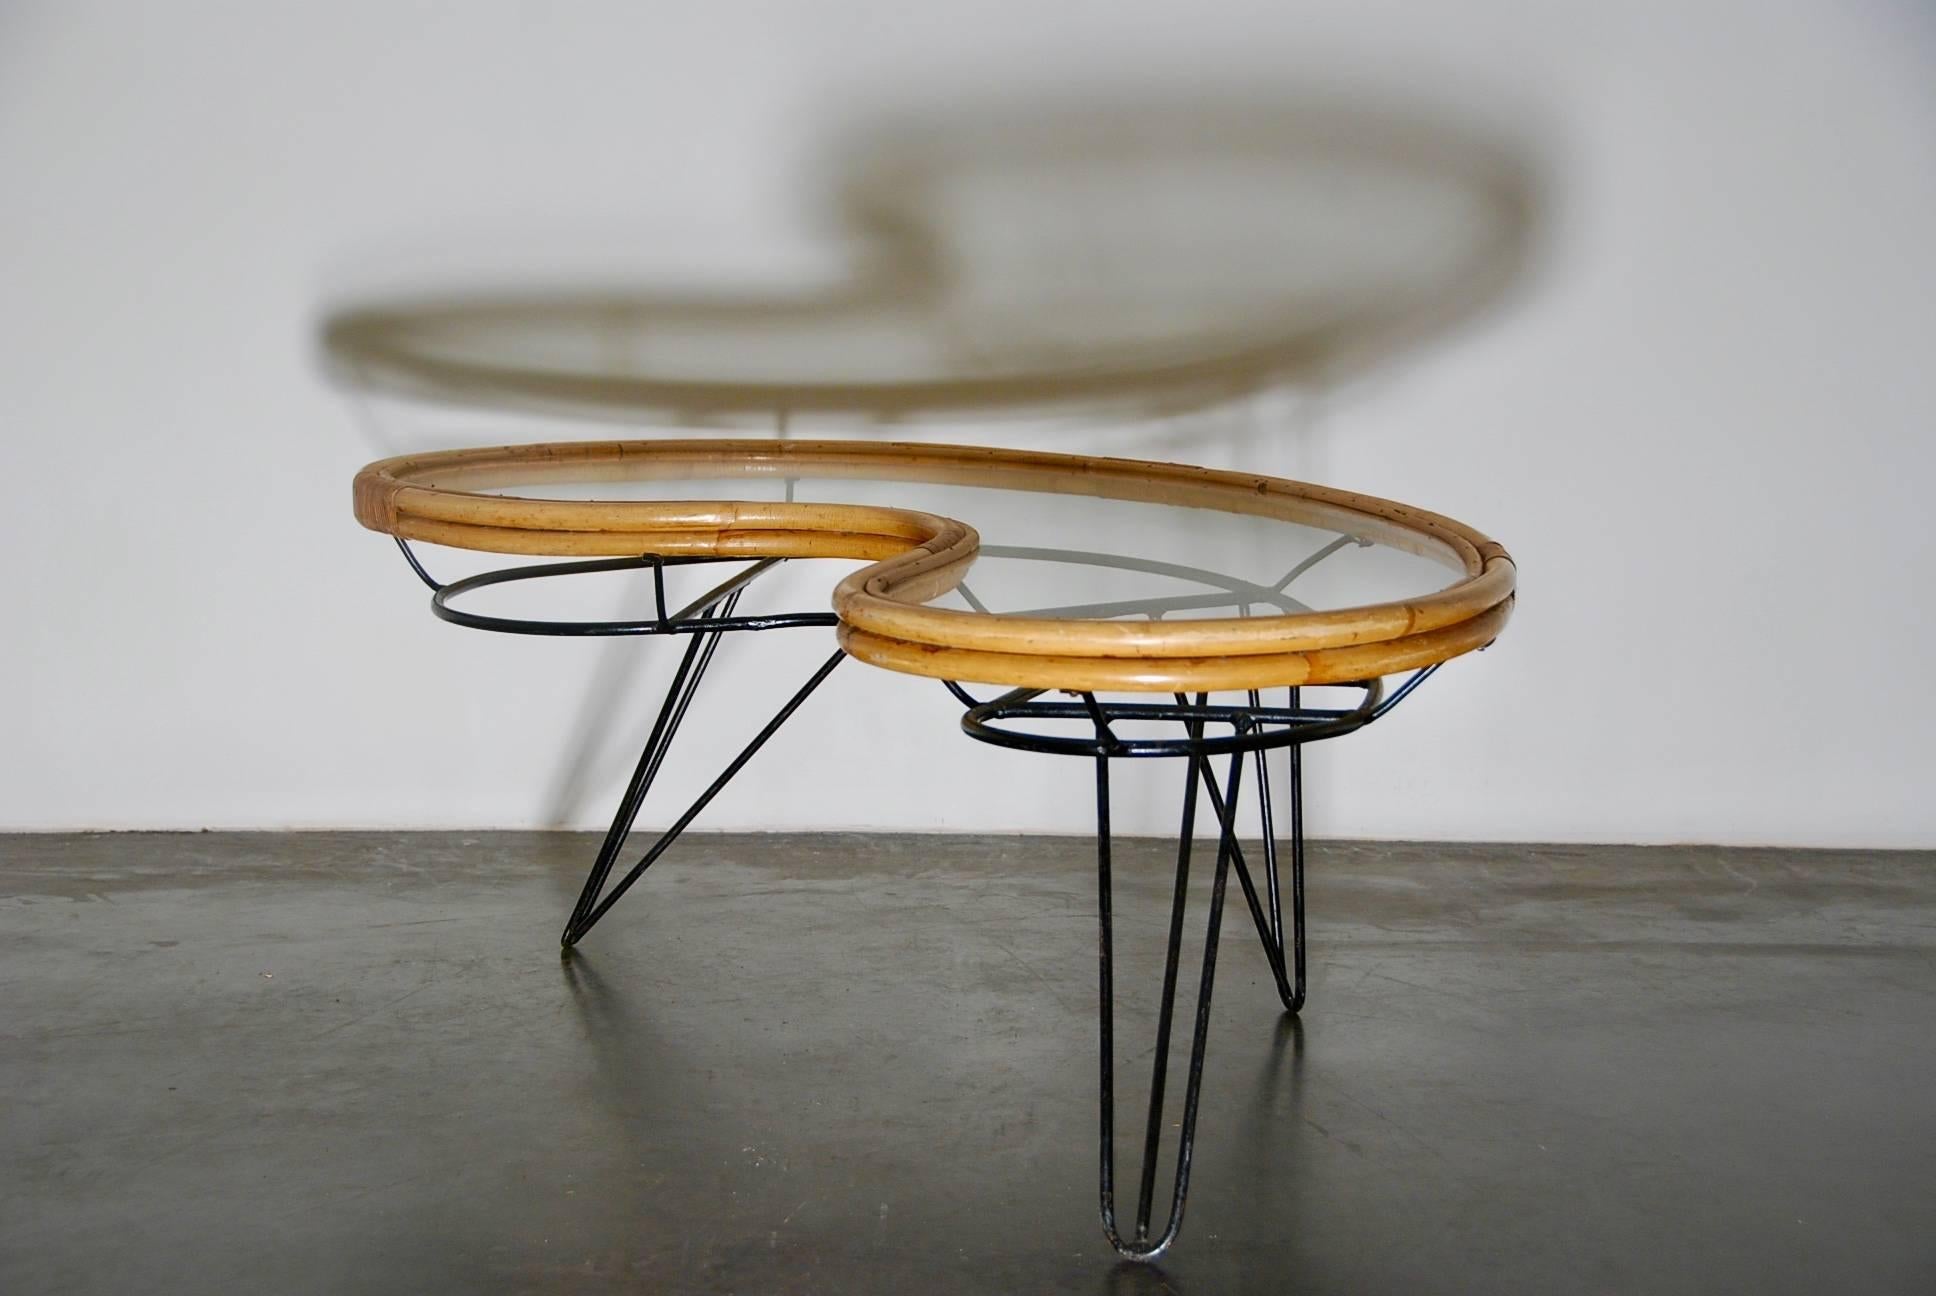 Coffee table designed by Dirk van Sliedrecht, Netherlands, 1950s.
Metal frame, glass tabletop with rattan finition.